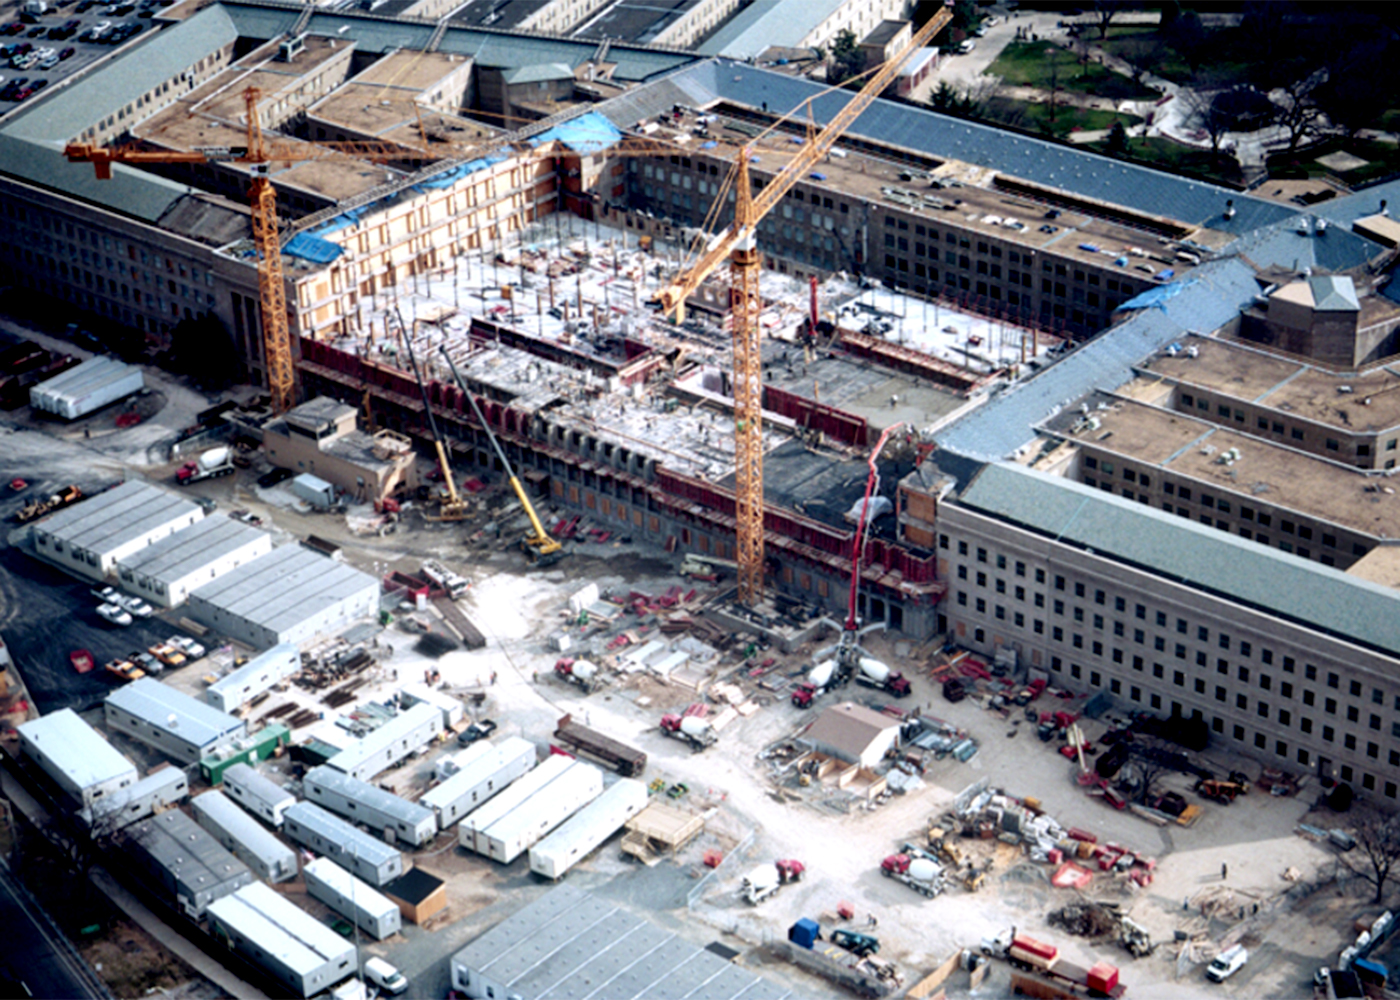 Pentagon Reconstruction and Renovation Project Photo